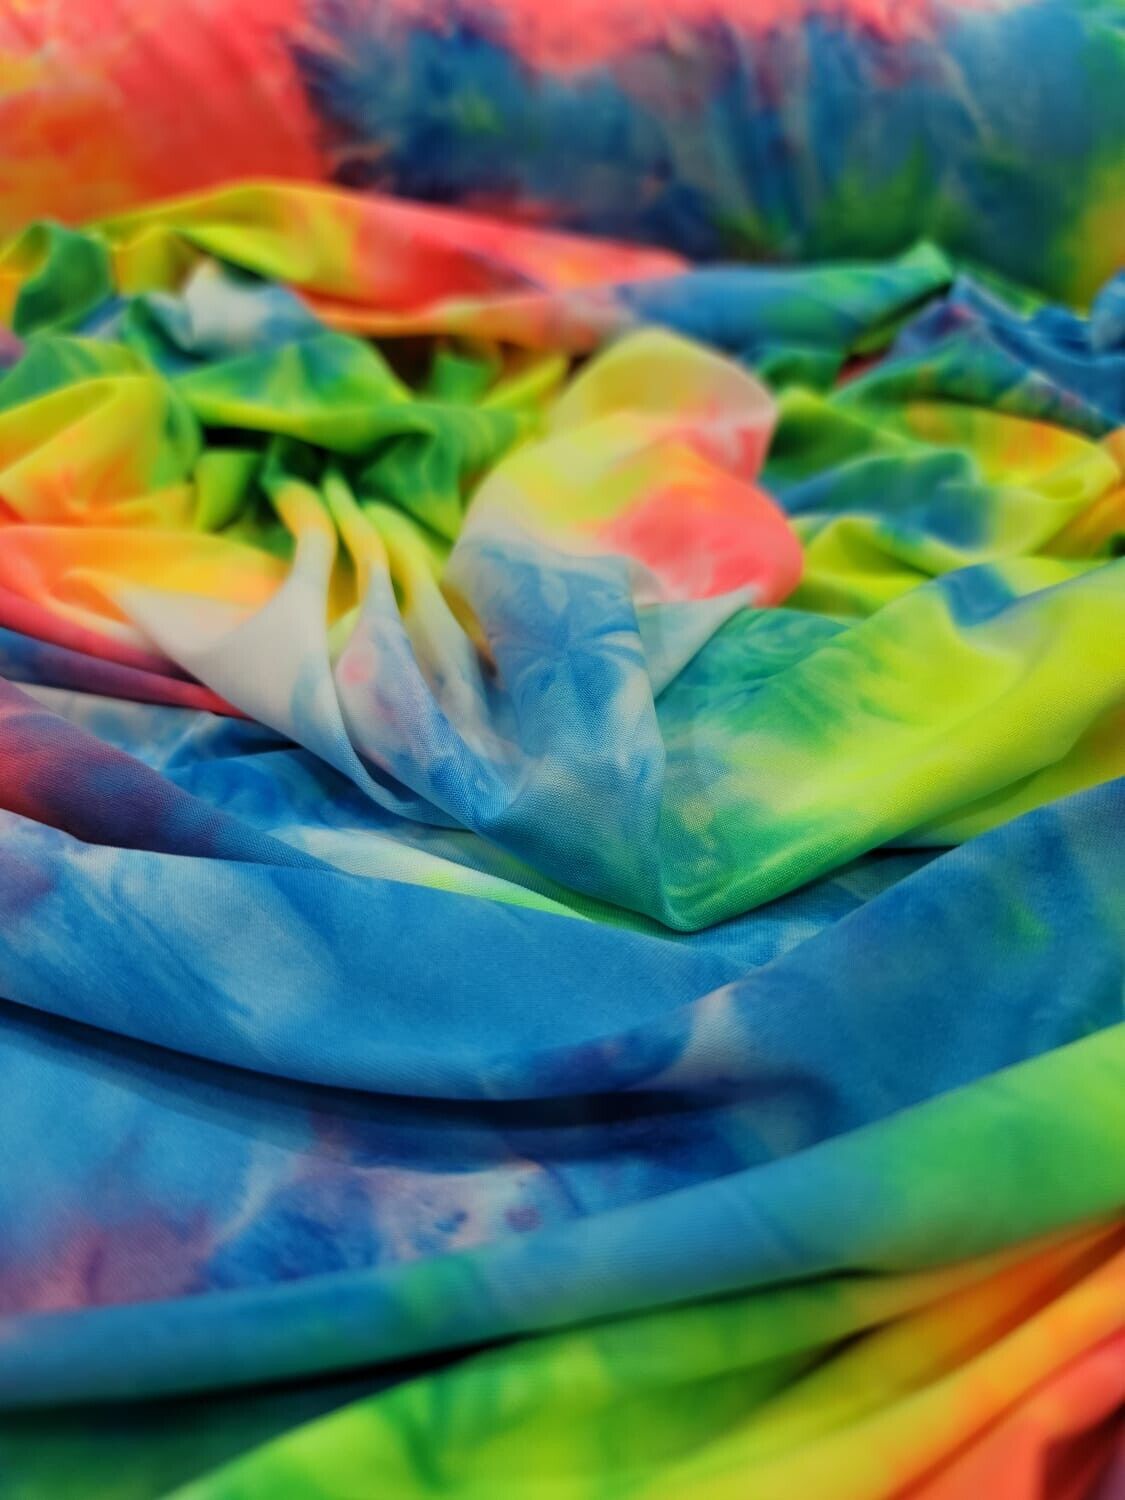 Multicolor Spandex Fabric - Sold by the Yard - Neon Tie Dye Yellow Blue Coral